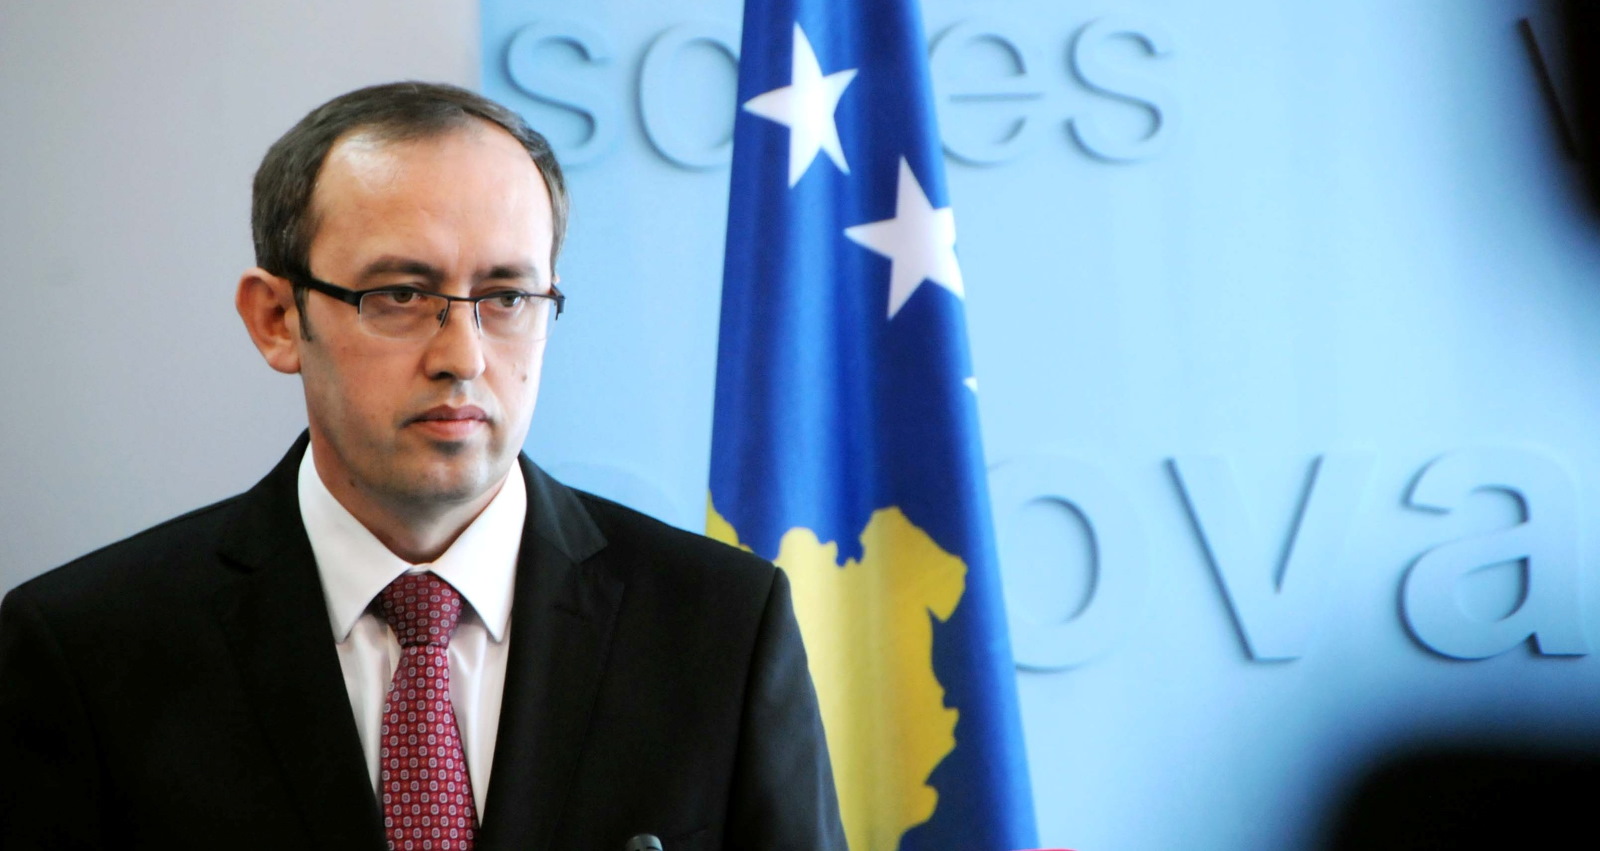 Kosovo, the new government led by Avdullah Hoti is born